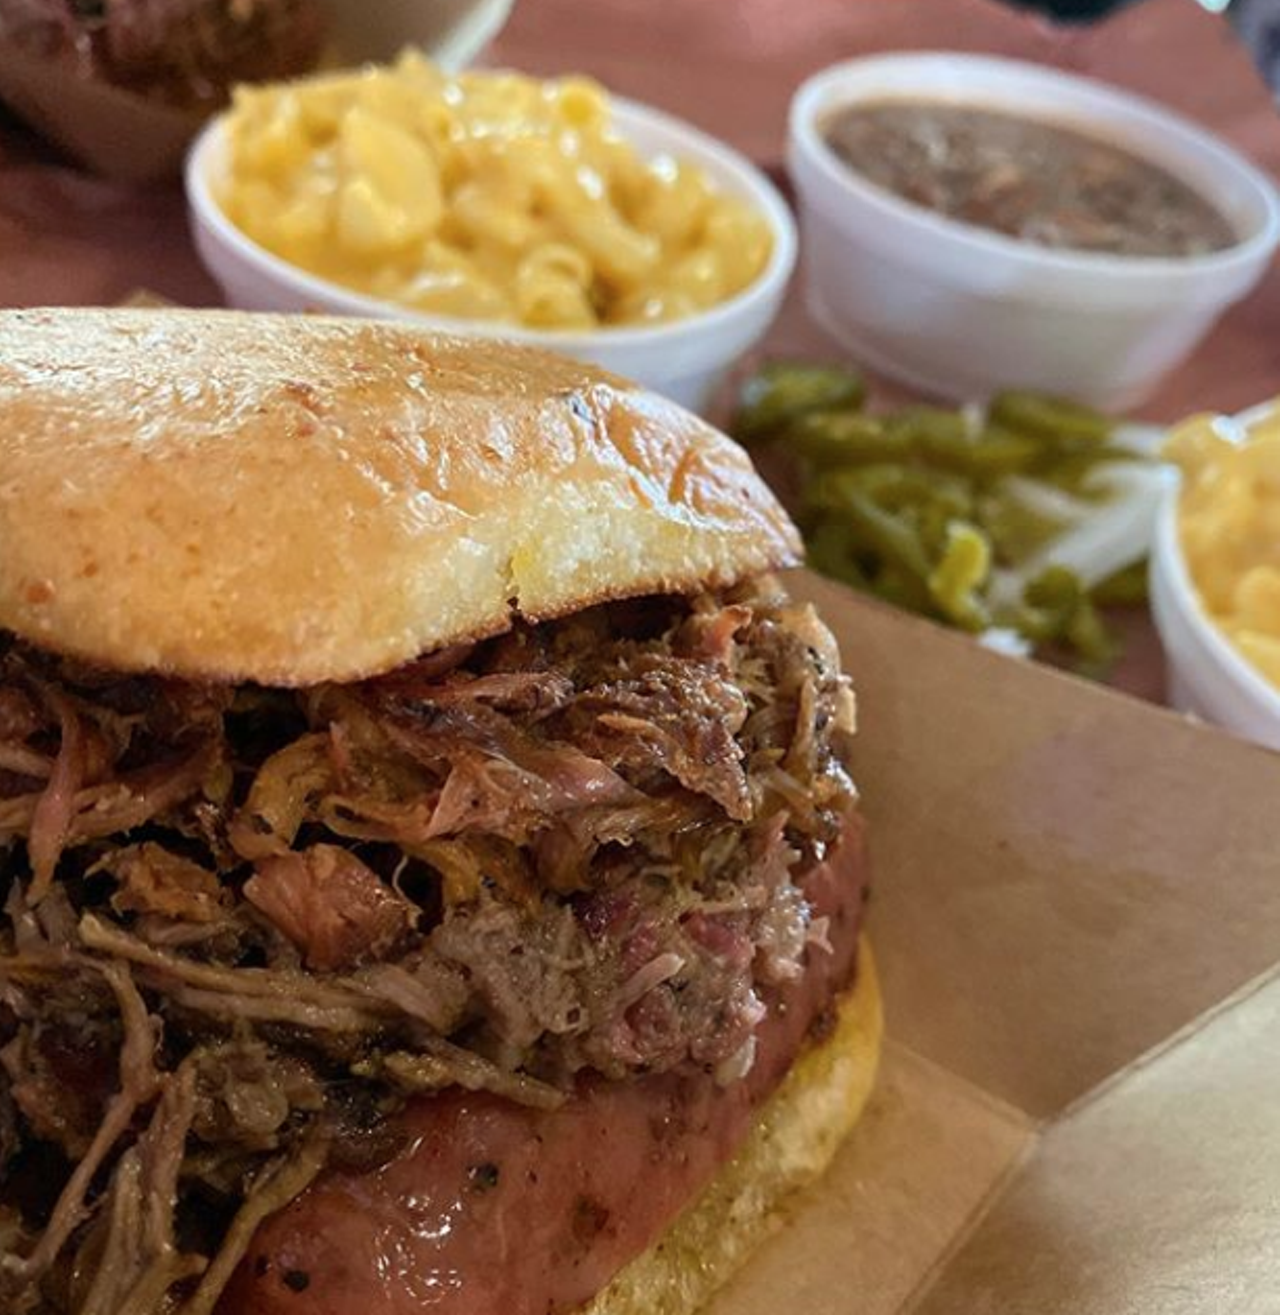 B-Daddy's BBQ
After just seven months in business, this Spring Branch barbecue spot closed in June. The business was previously named Texas 46.
Photo via Instagram / wolfpack_rose